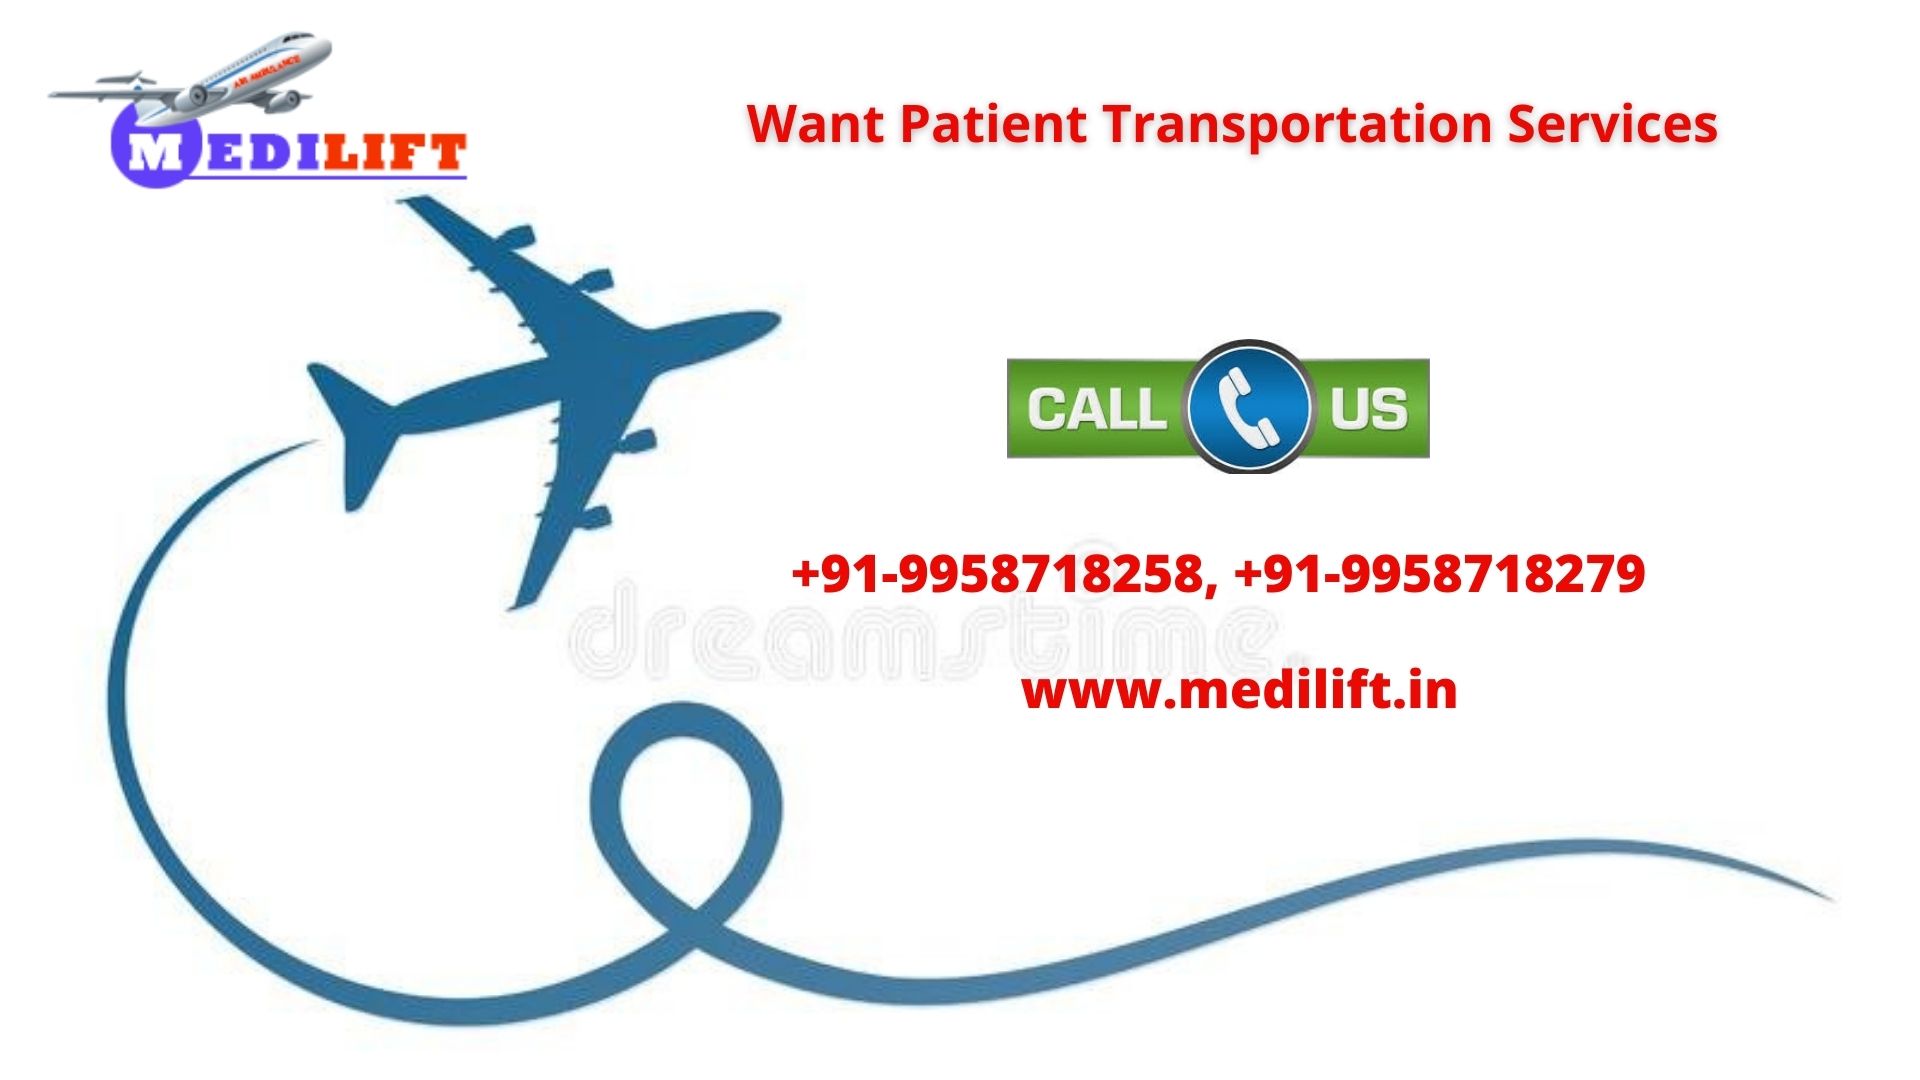 Use Air Ambulance Services in Raipur with Expert Medical Staff by Medilift at Reduce Cost